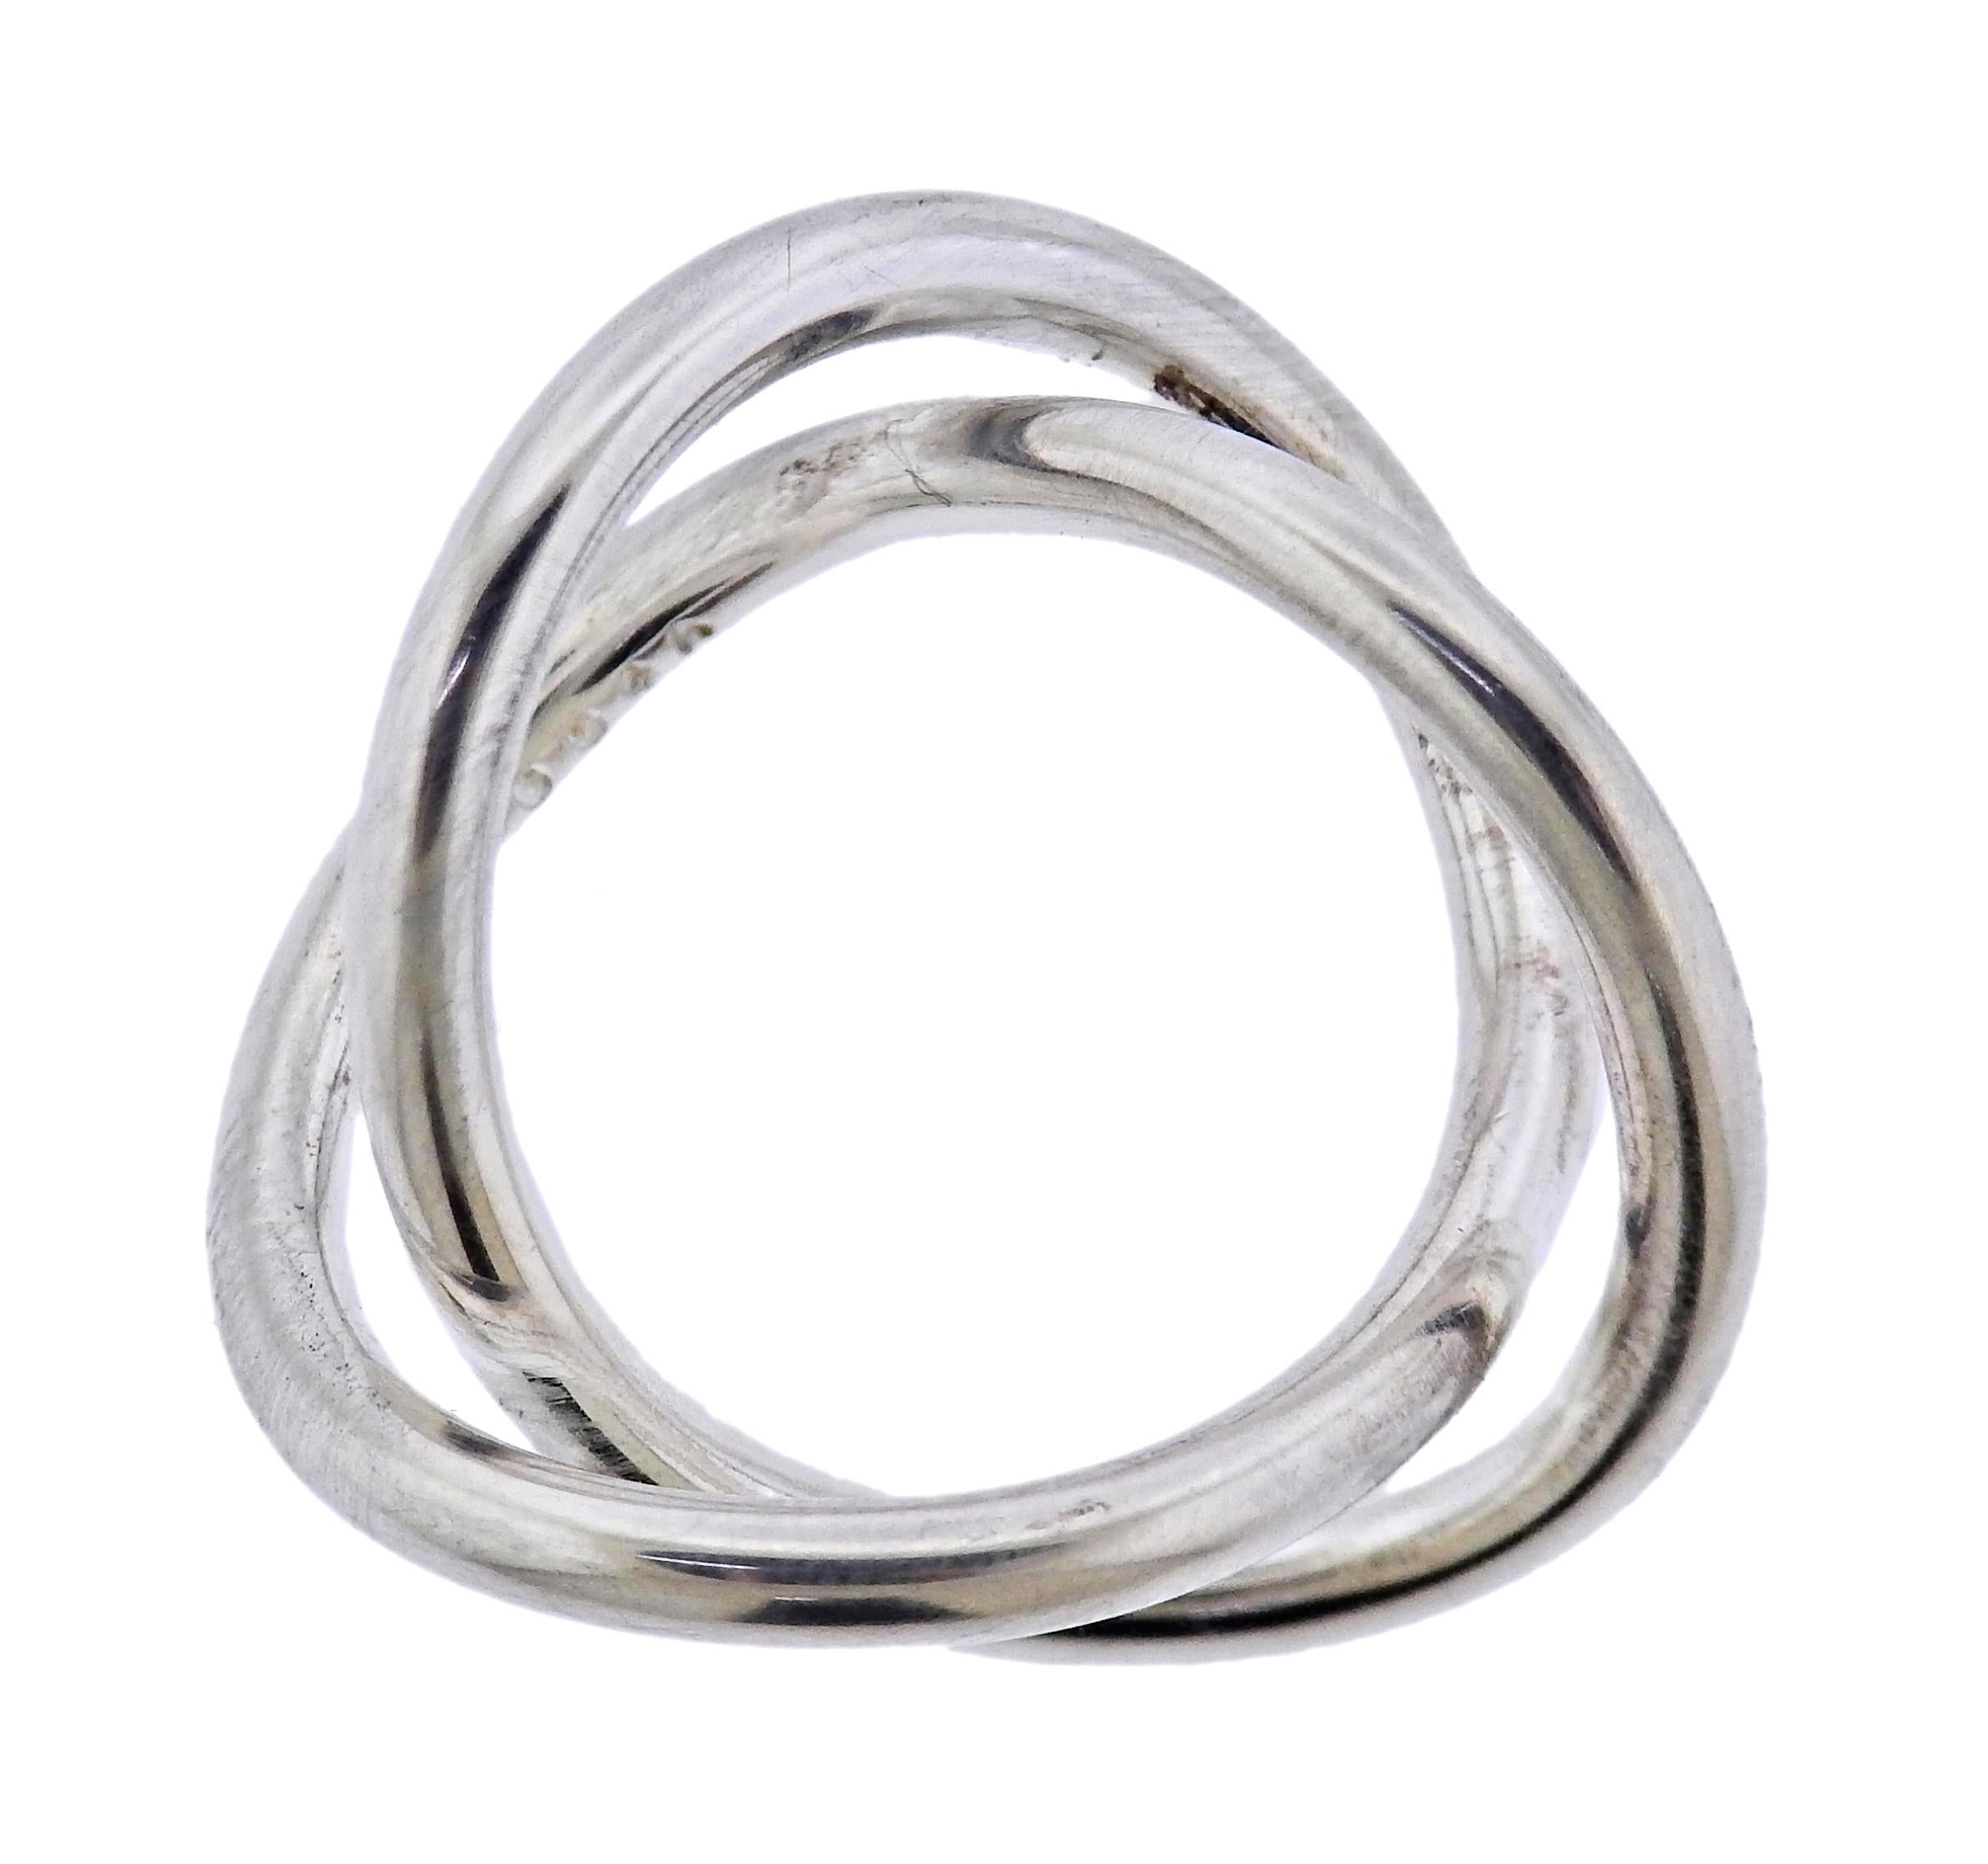 Brand new Georg Jensen sterling silver Alliance ring. Ring is 11mm wide. Available in size  3 (6). Model # 35589802. Marked: GJ 925 S, 554 A. Weight - 6.8 grams.